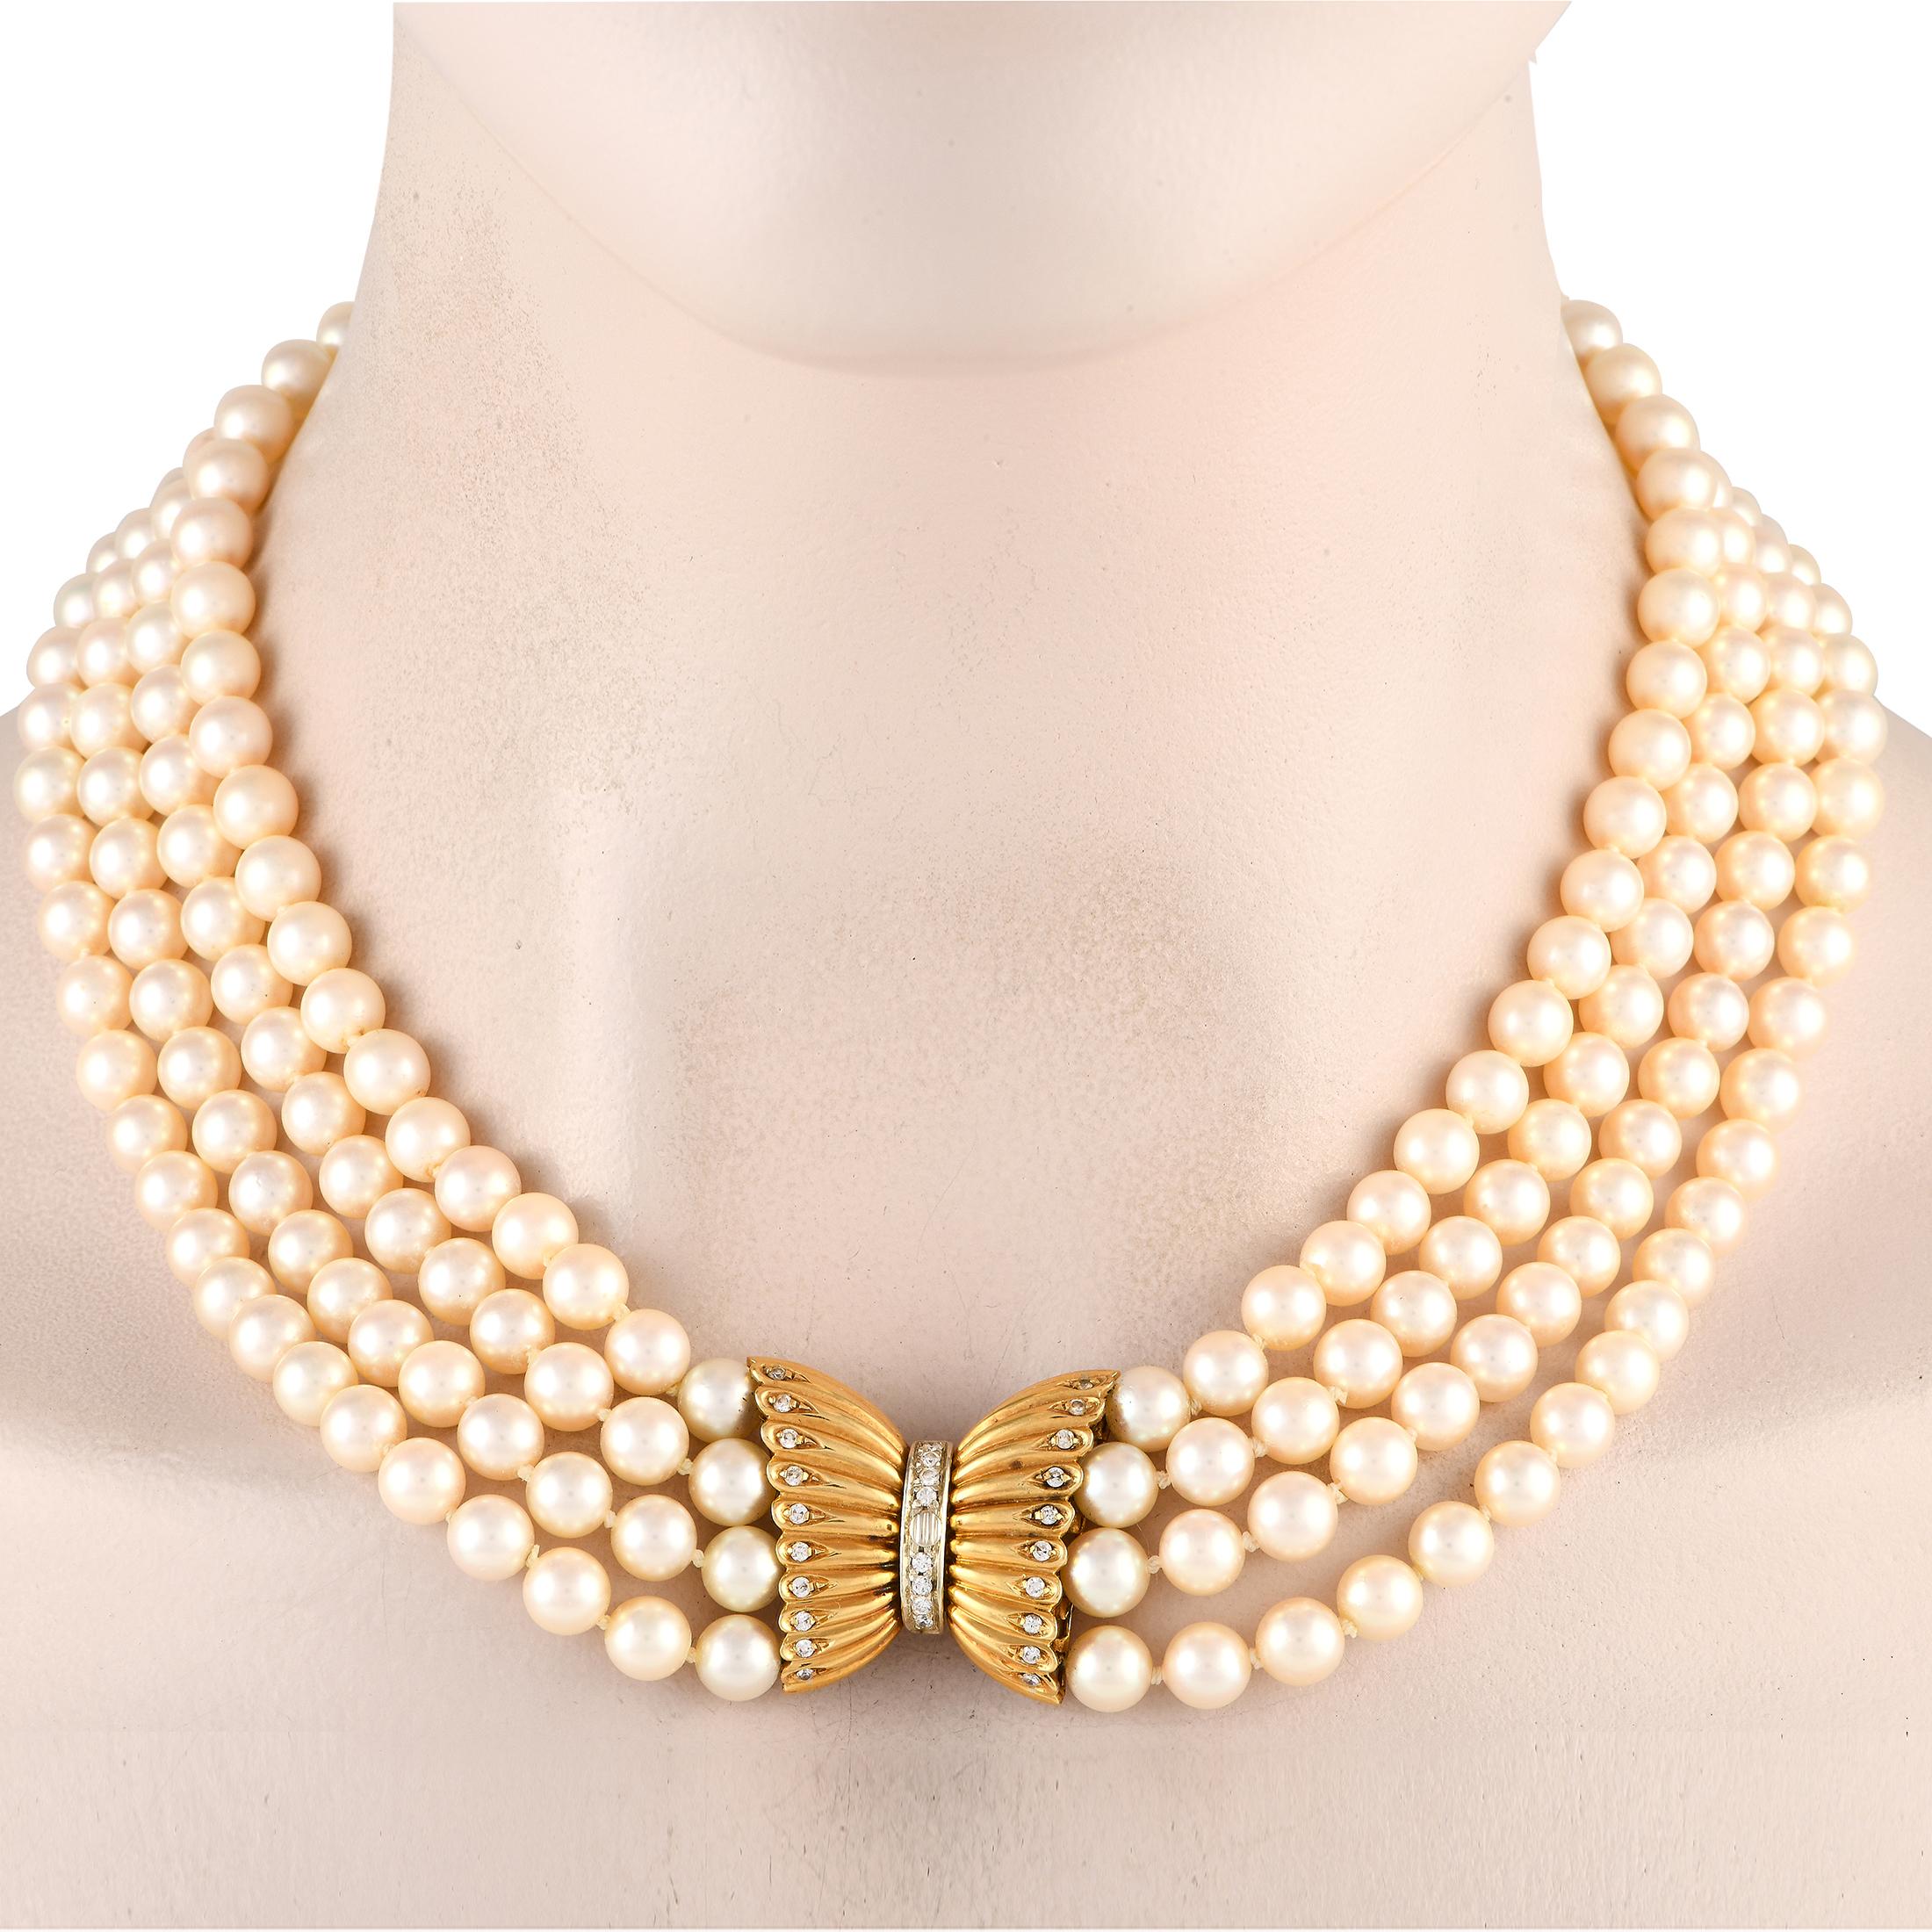 It's impossible not to notice the gorgeous glow of this necklace. This fabulous neckpiece features four strands of 7.5mm pearls finished with a box tab clasp with a diamond-adorned 18K yellow gold bow motif.Offered in estate condition, this 18K